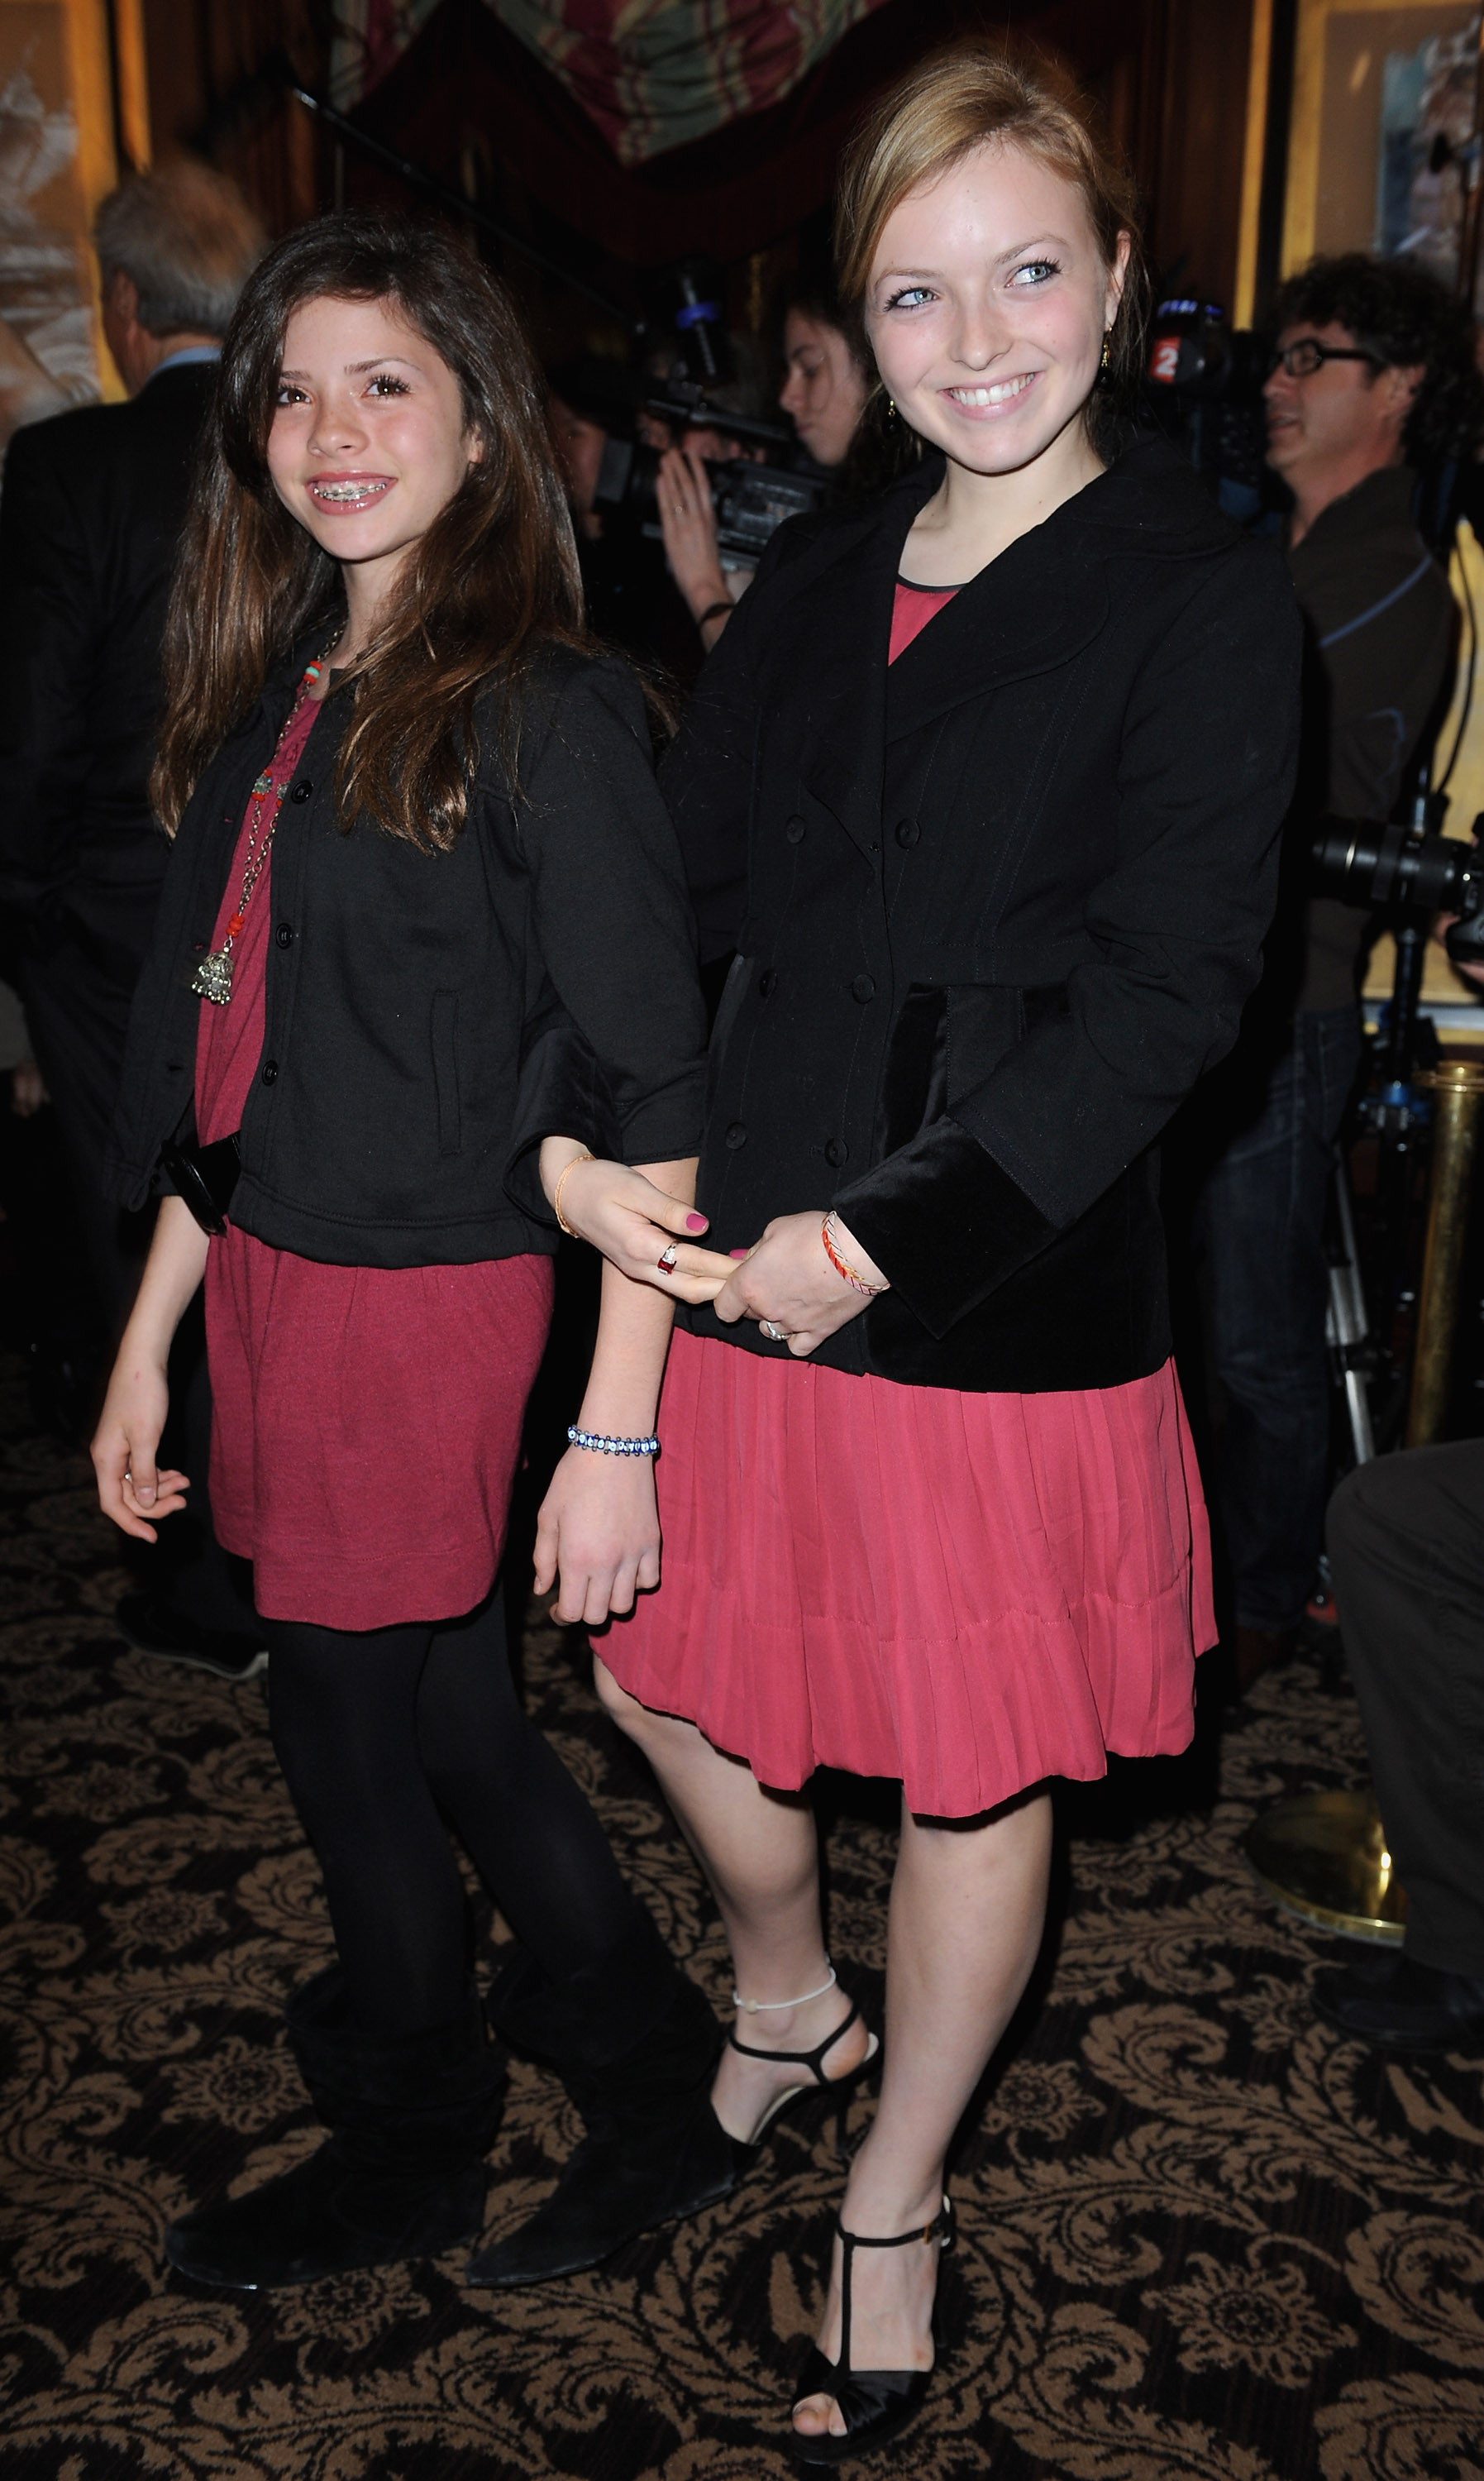 Morgan and Francesca Eastwood attend a ceremony organized by the Cannes film at the Fouquet's restaurant on February 25, 2009 in Paris, France. | Source: Getty Images